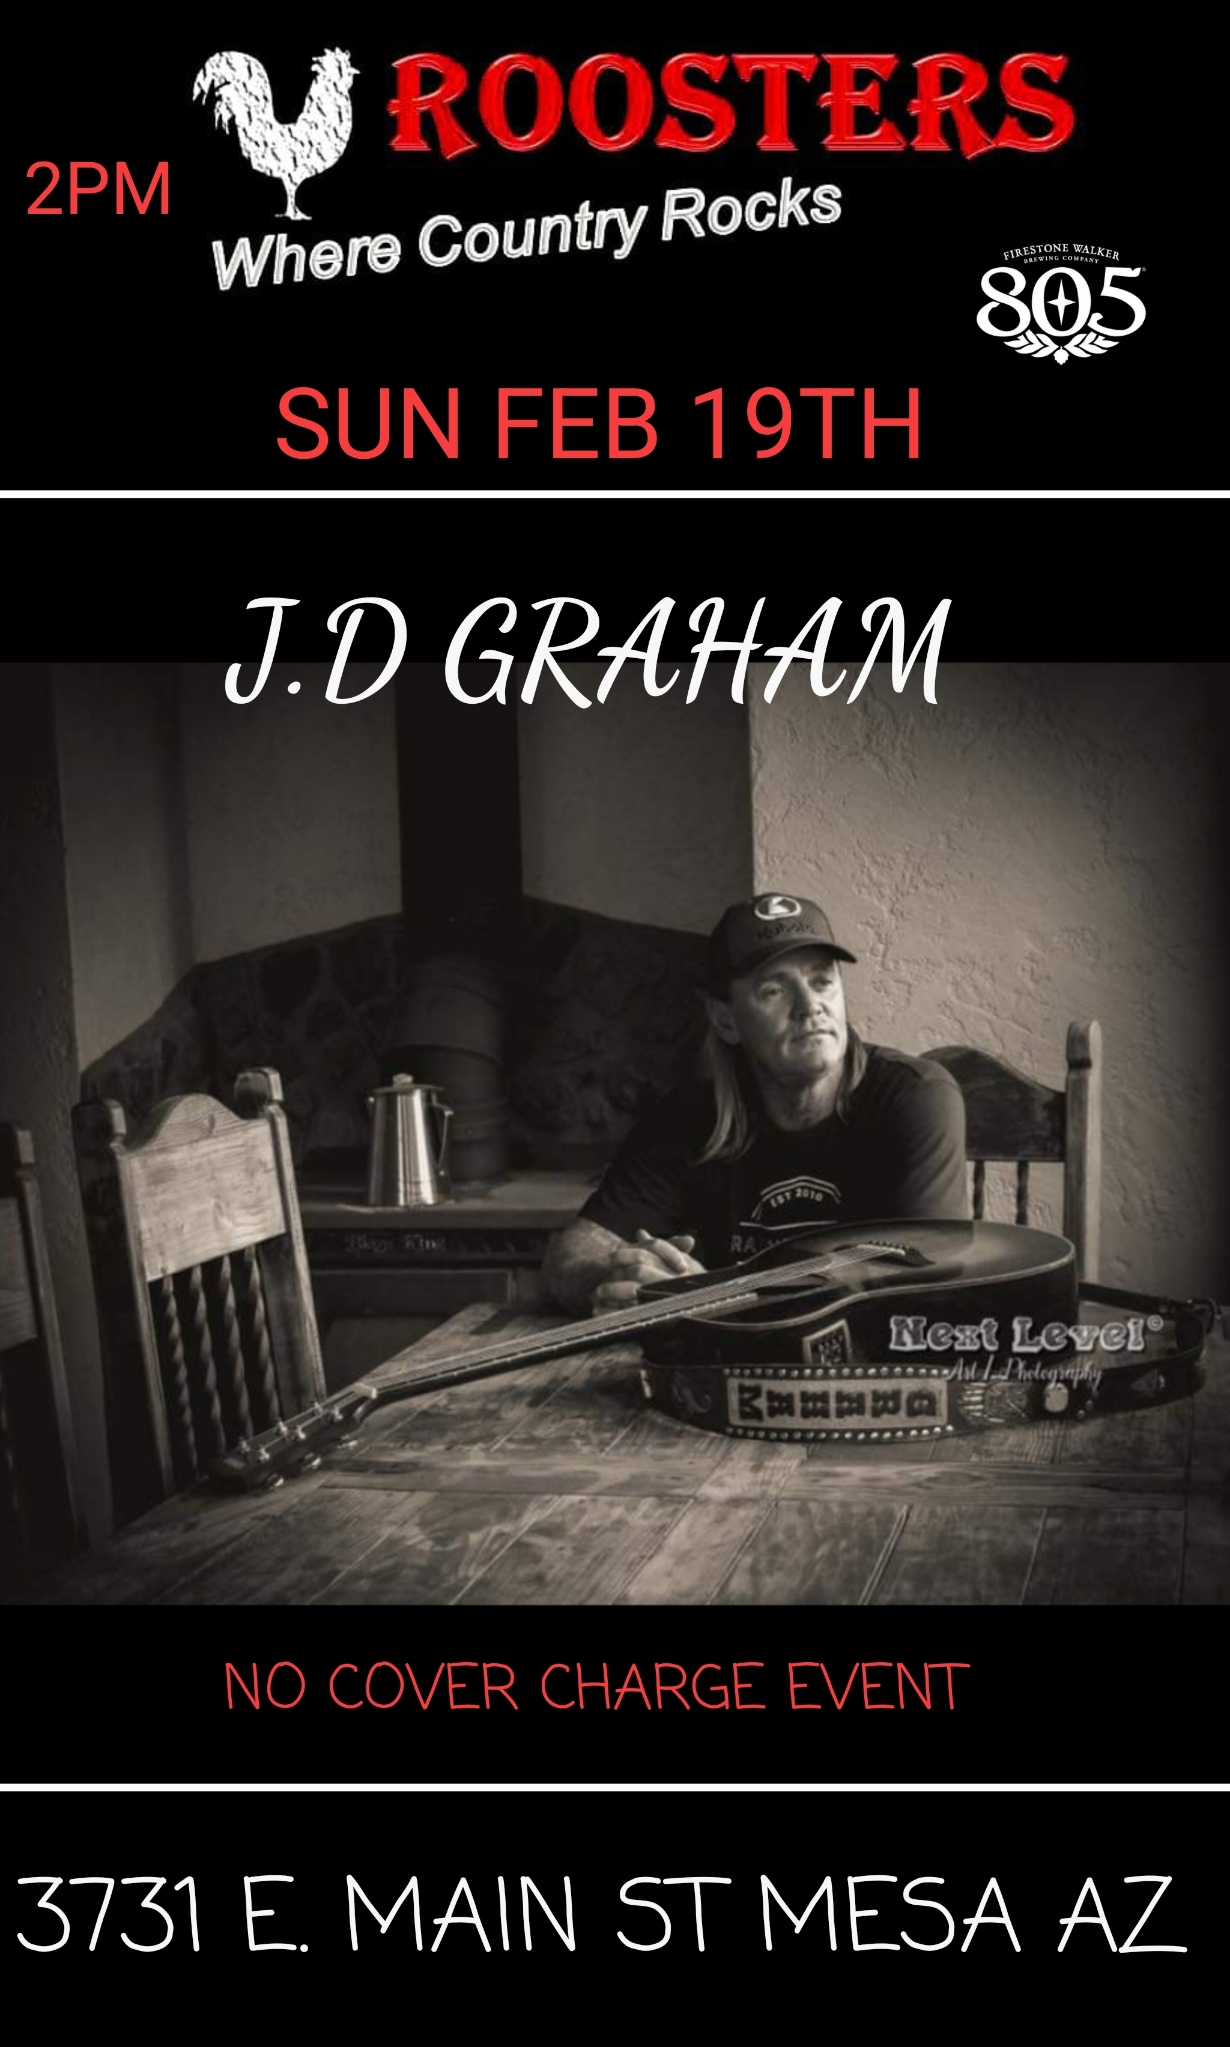 JD Graham Live at Roosters No Cover